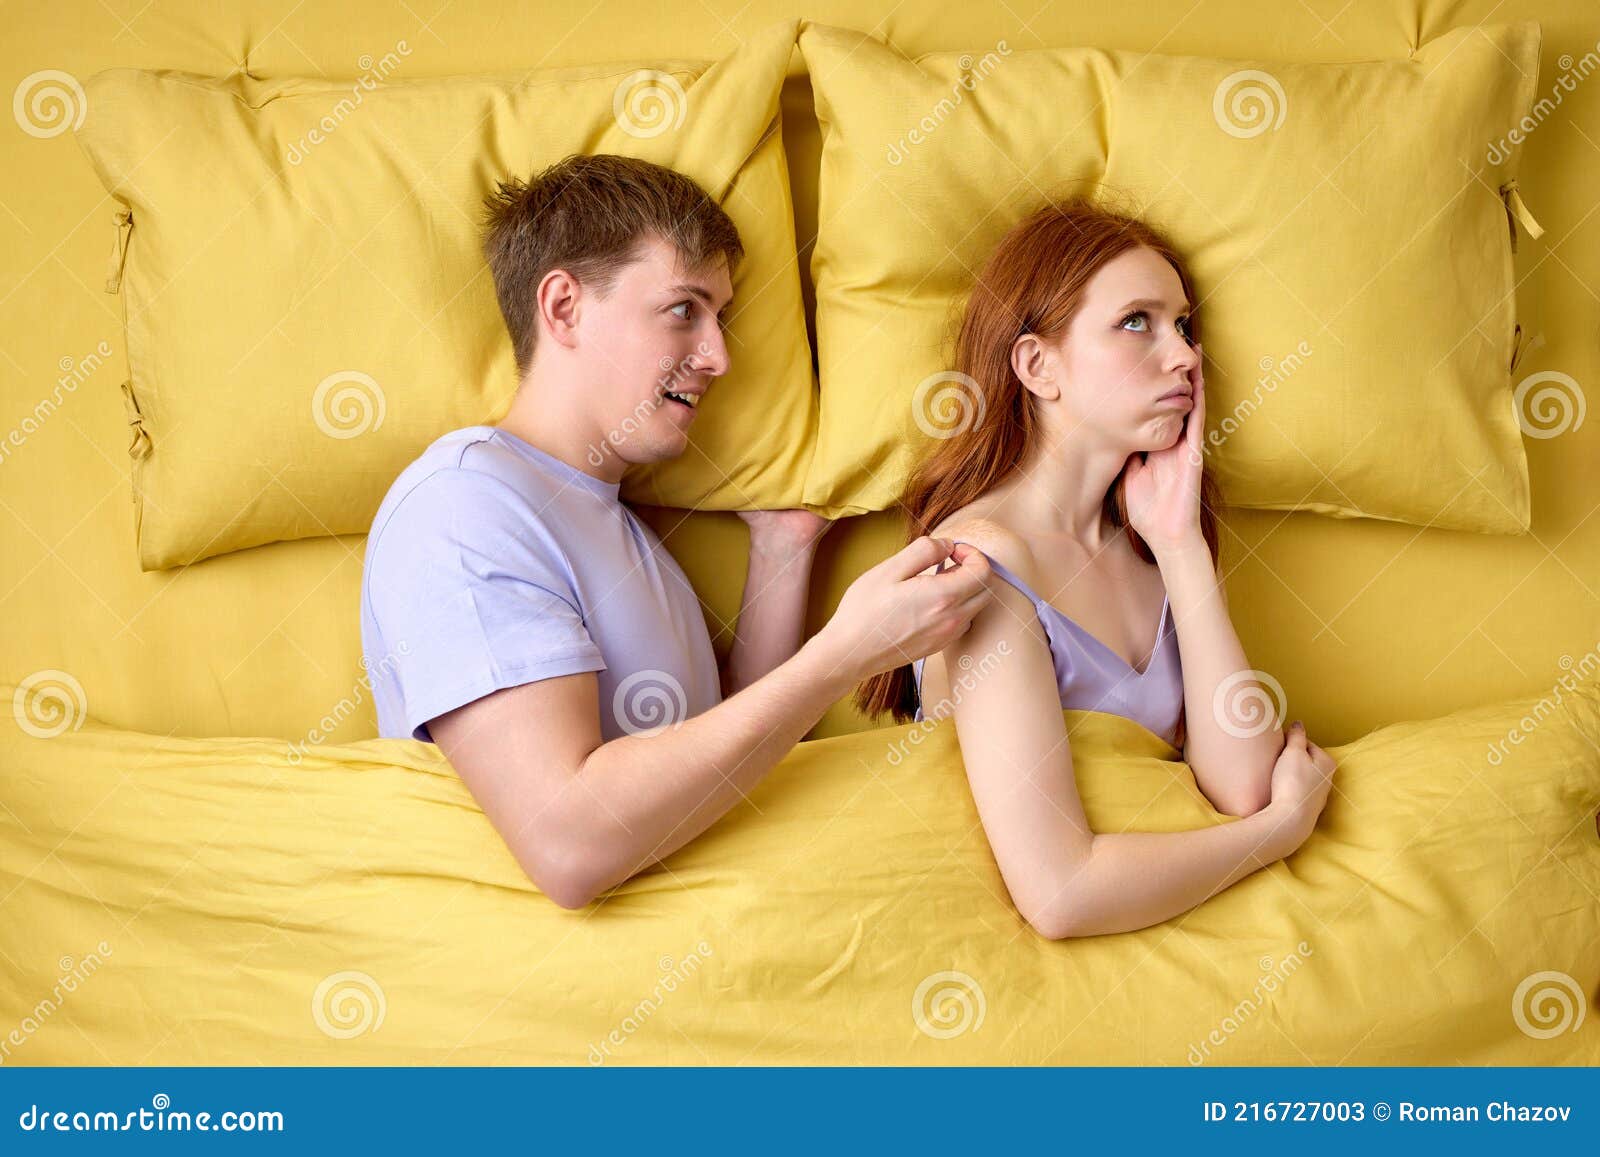 Man Misunderstanding Why Wife Does Not Want Sex with Him Stock Image photo